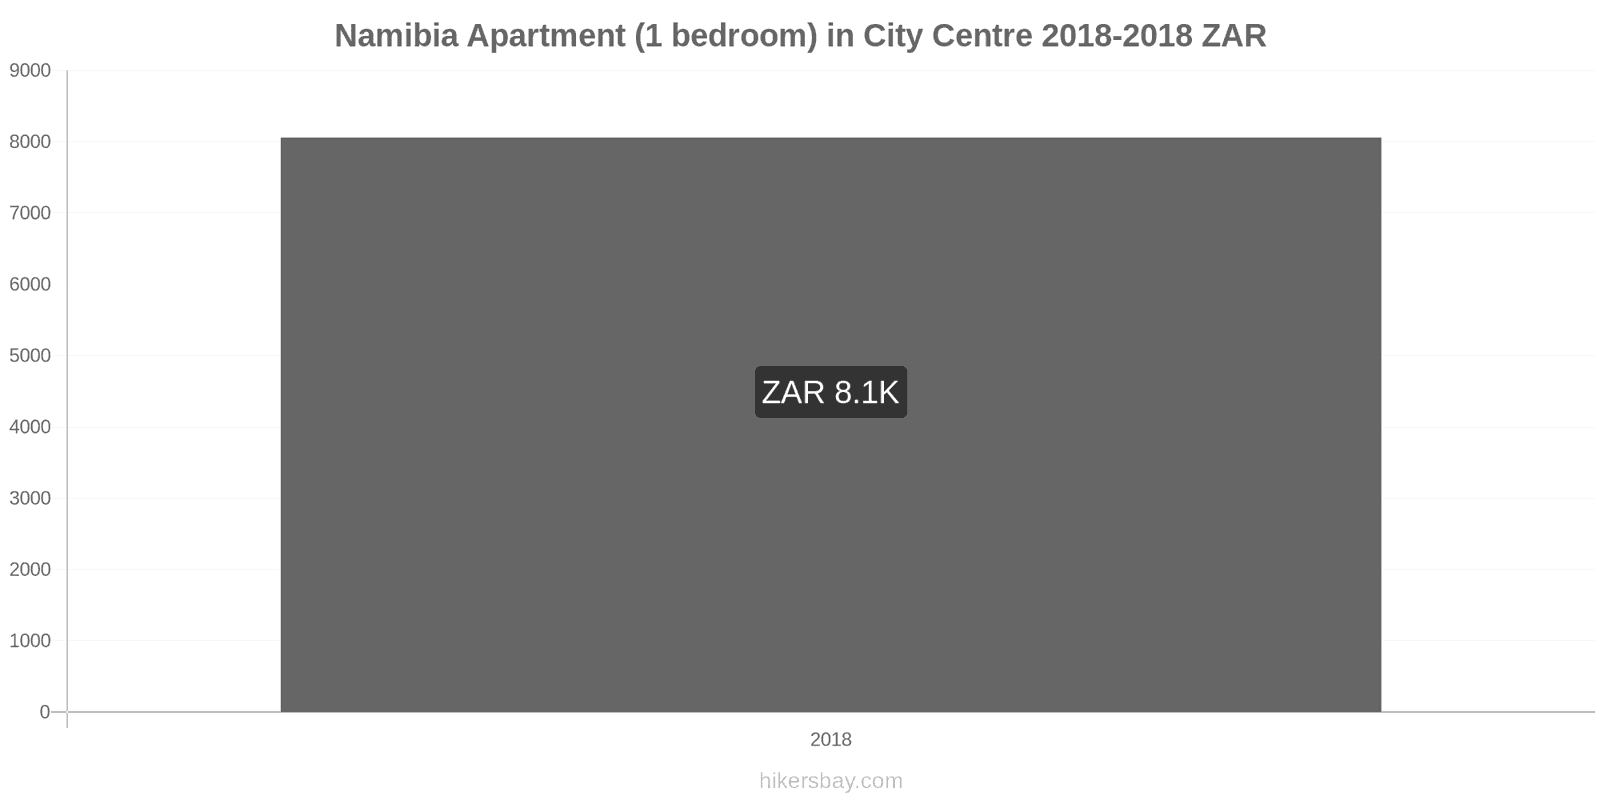 Namibia price changes Apartment (1 bedroom) in city centre hikersbay.com